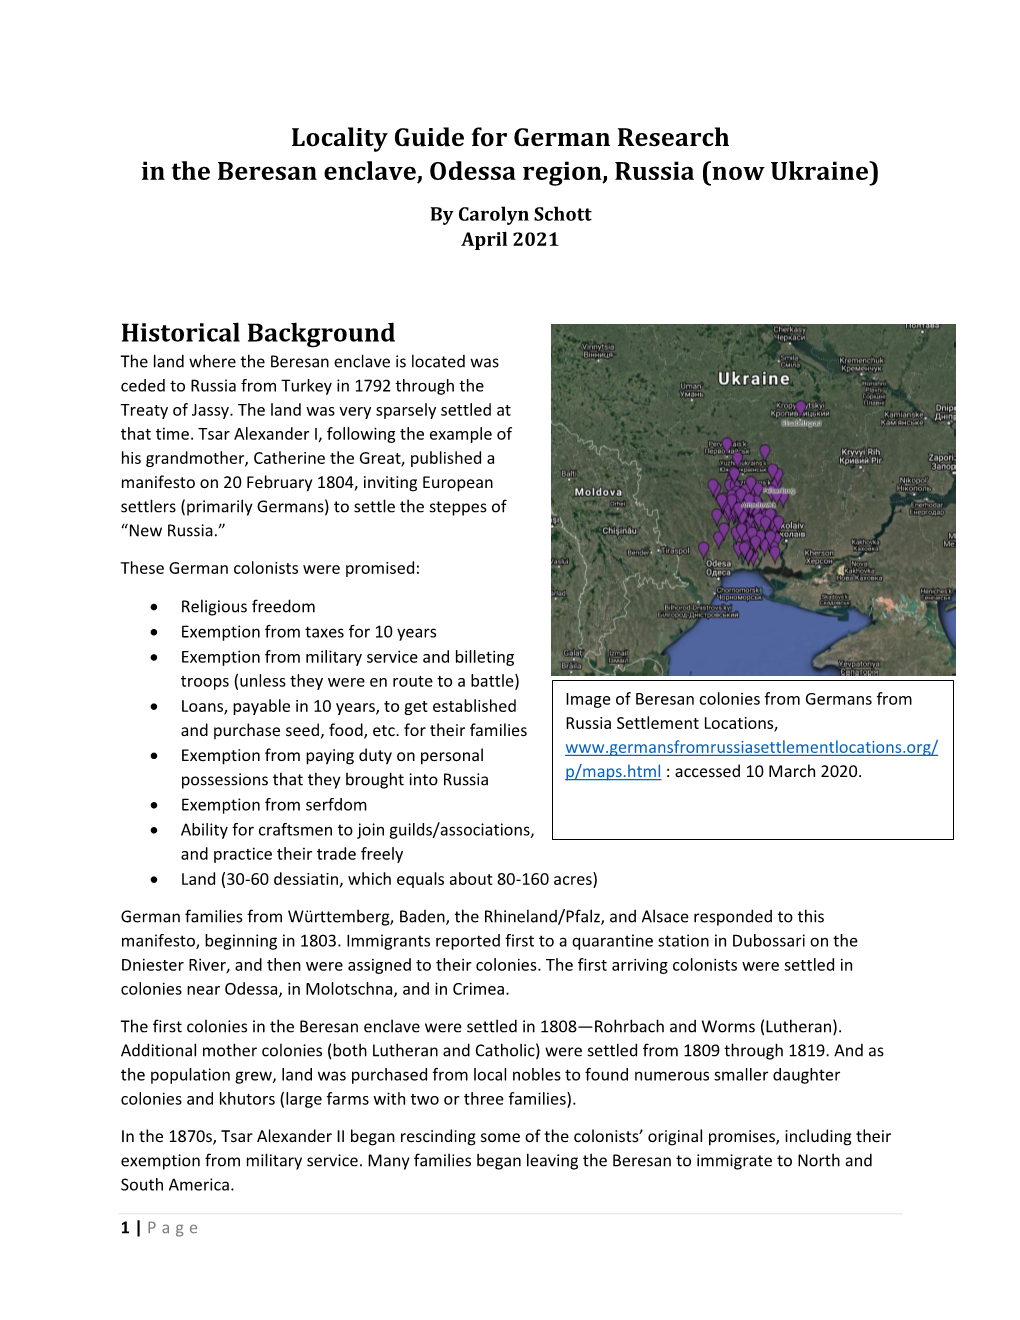 Locality Guide for German Research in the Beresan Enclave, Odessa Region, Russia (Now Ukraine) by Carolyn Schott April 2021